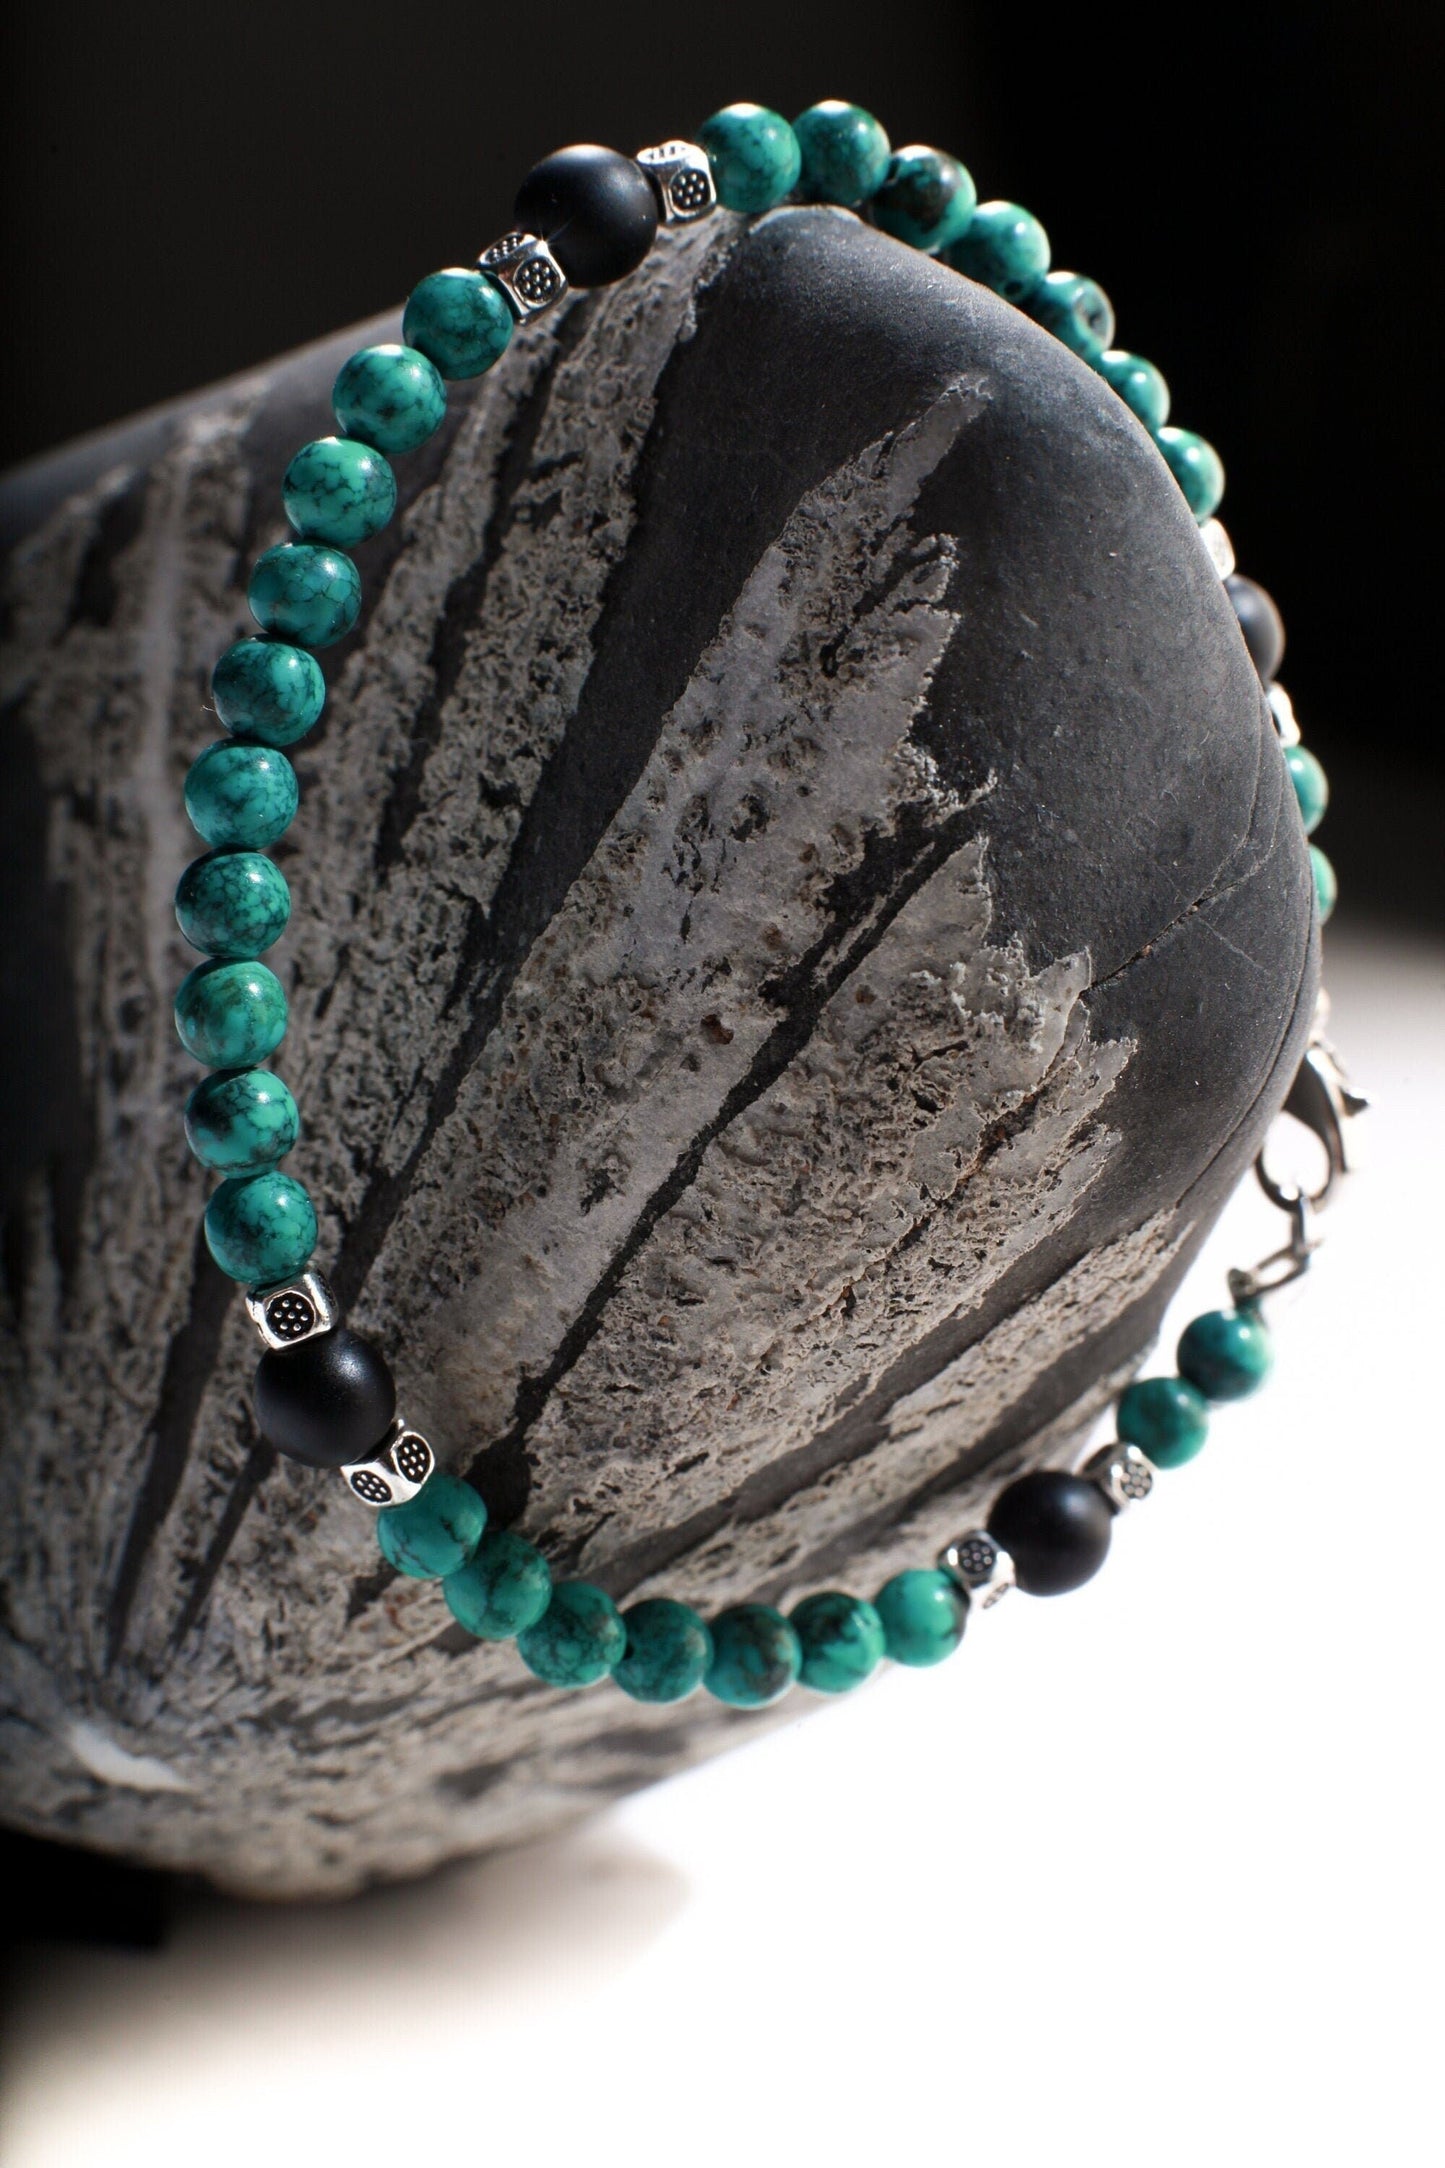 Natural Turquoise AAA Quality Spiderweb Matrix Bracelet Accented with Matte Black Onyx Beads Available in 6&quot;, 6.5&quot;, 7&quot;, 7.5&quot; and 8&quot;